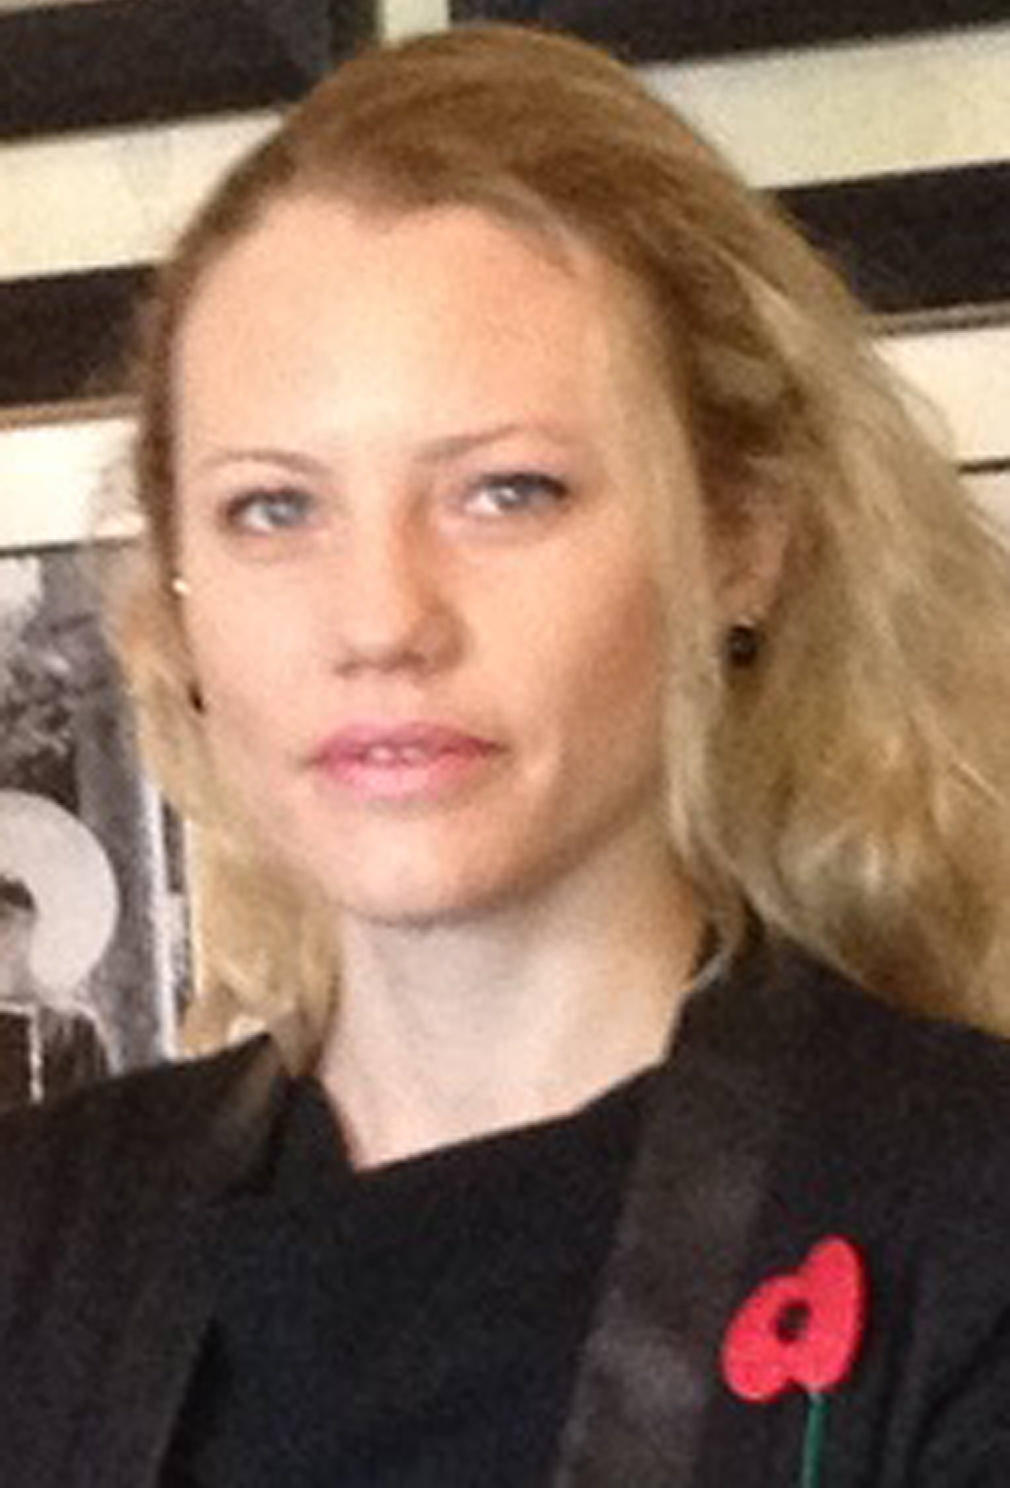 WikiLeaks' Sarah Harrison has kept an extremely low profile.